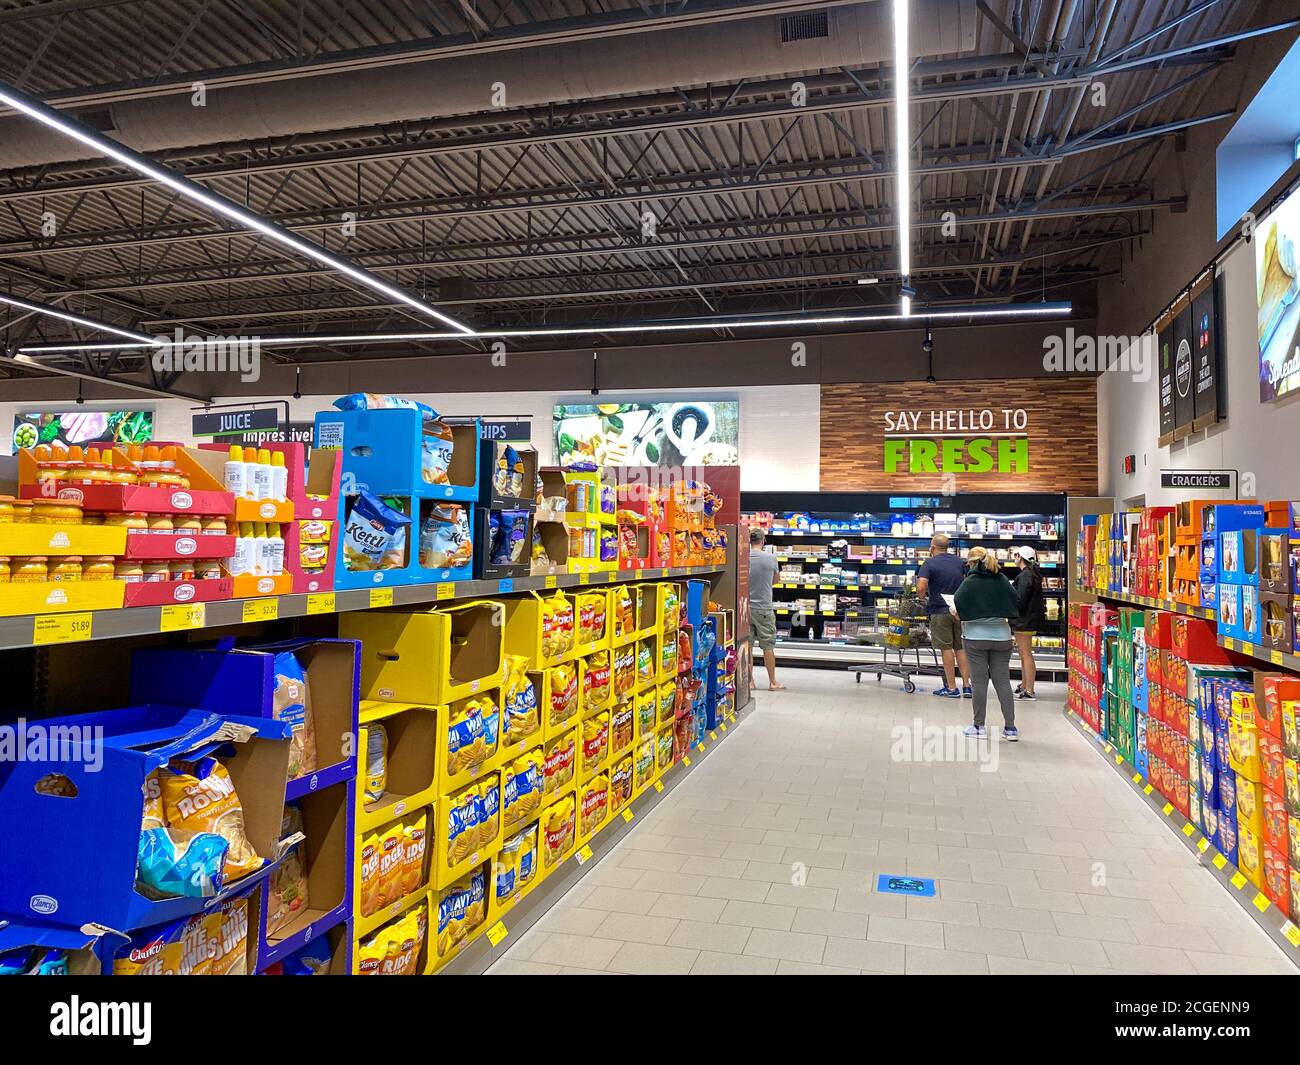 Orlando, FL/USA-5/16/20:  A display of a variety of potato chips and cookies at an Aldi grocery store waiting for customers to purchase. Stock Photo